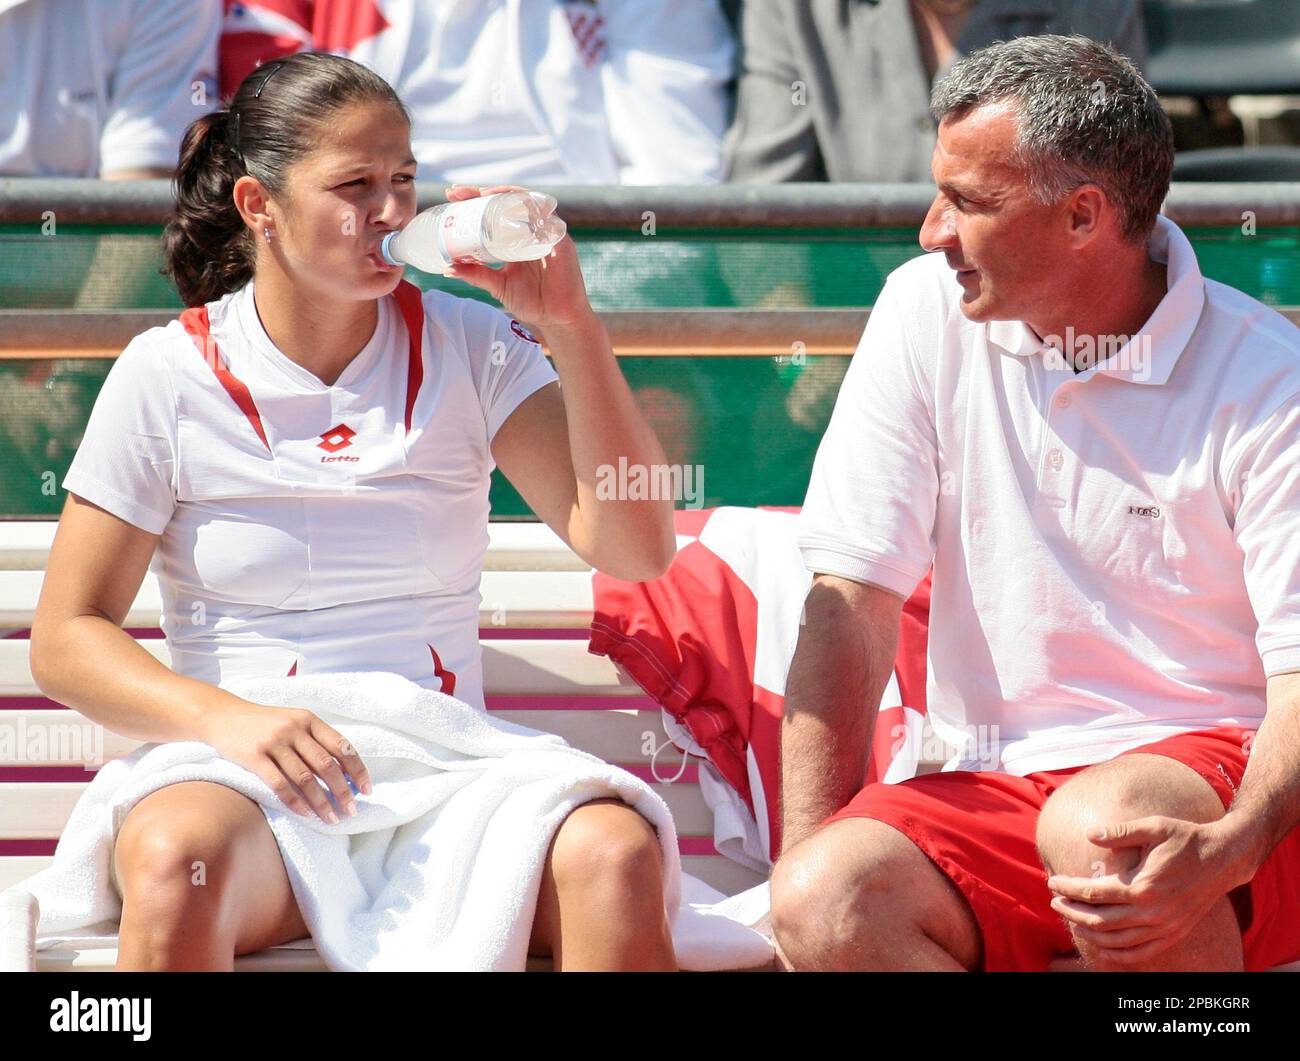 Jelena Kostanic-Tosic from Croatia, left, sits next to team captain Goran Prpic during a pause of her match against Anna-Lena Groenefeld from Germany at the World Group II 2007 first round Tennis Fed Cup competition between Germany and Croatia in Fuerth, southern Germany, Sunday, April 22, 2007. Groenefeld later won in 6-4, 6-3. (AP Photo/Uwe Lein) Stock Photo